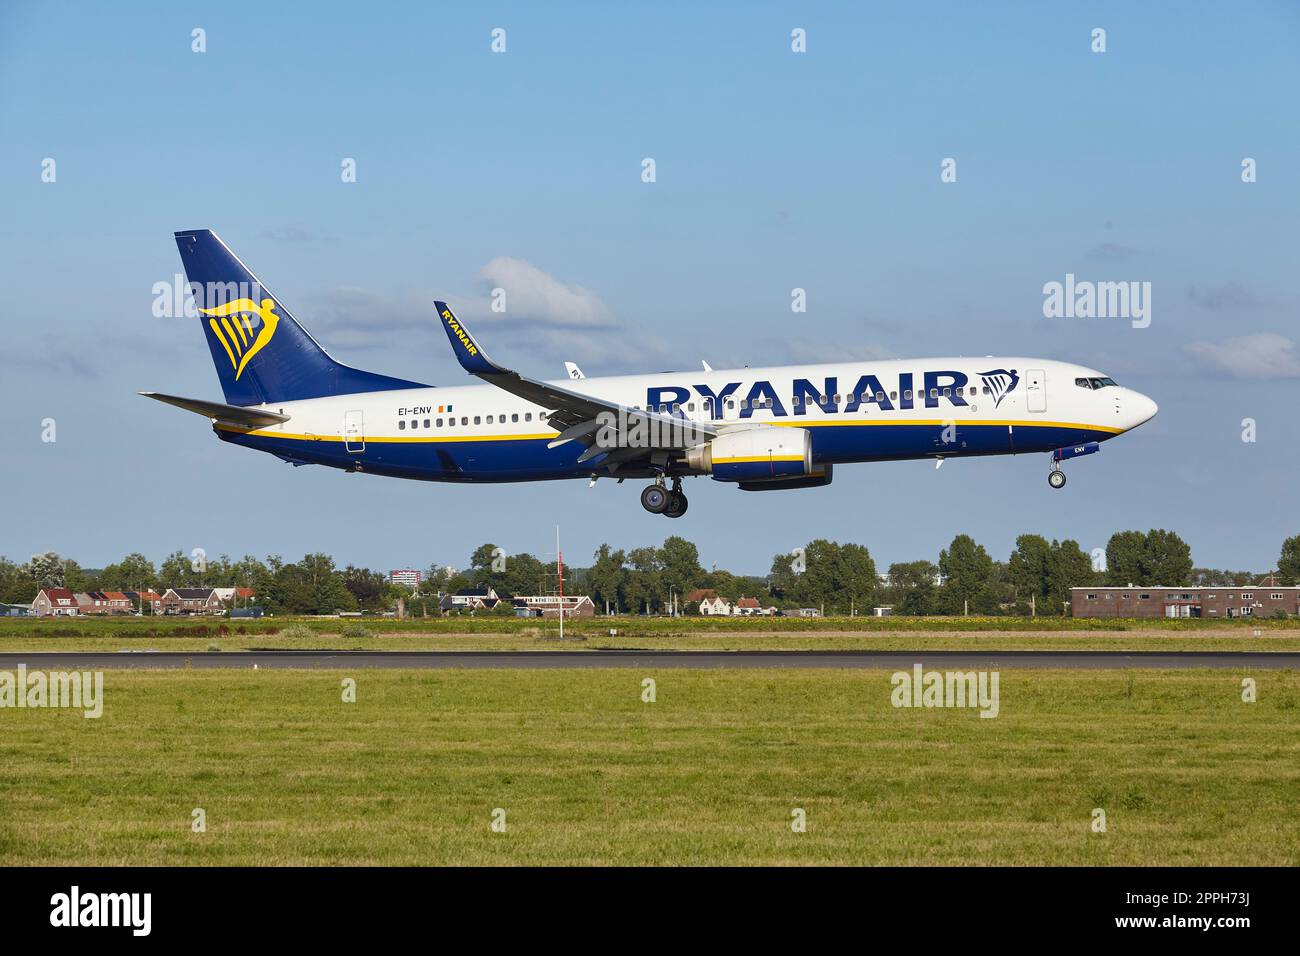 Vijfhuizen, The Netherlands - August, 20, 2022. The Boeing 737-8AS of Ryanair with the identification EI-ENV lands at Amsterdam Airport Schiphol (The Stock Photo